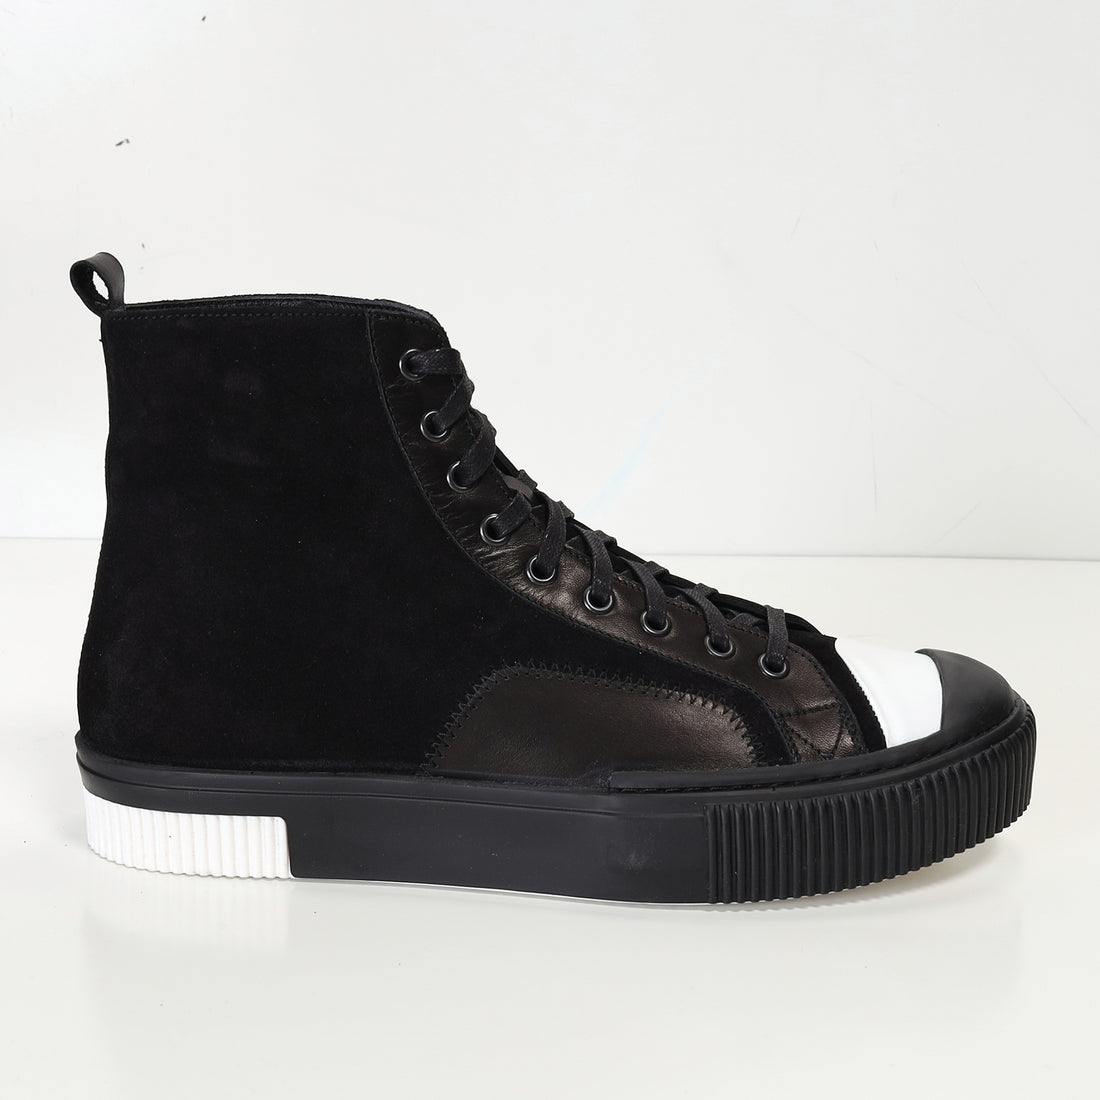 The King Leather and Suede High Tops - Black Suede